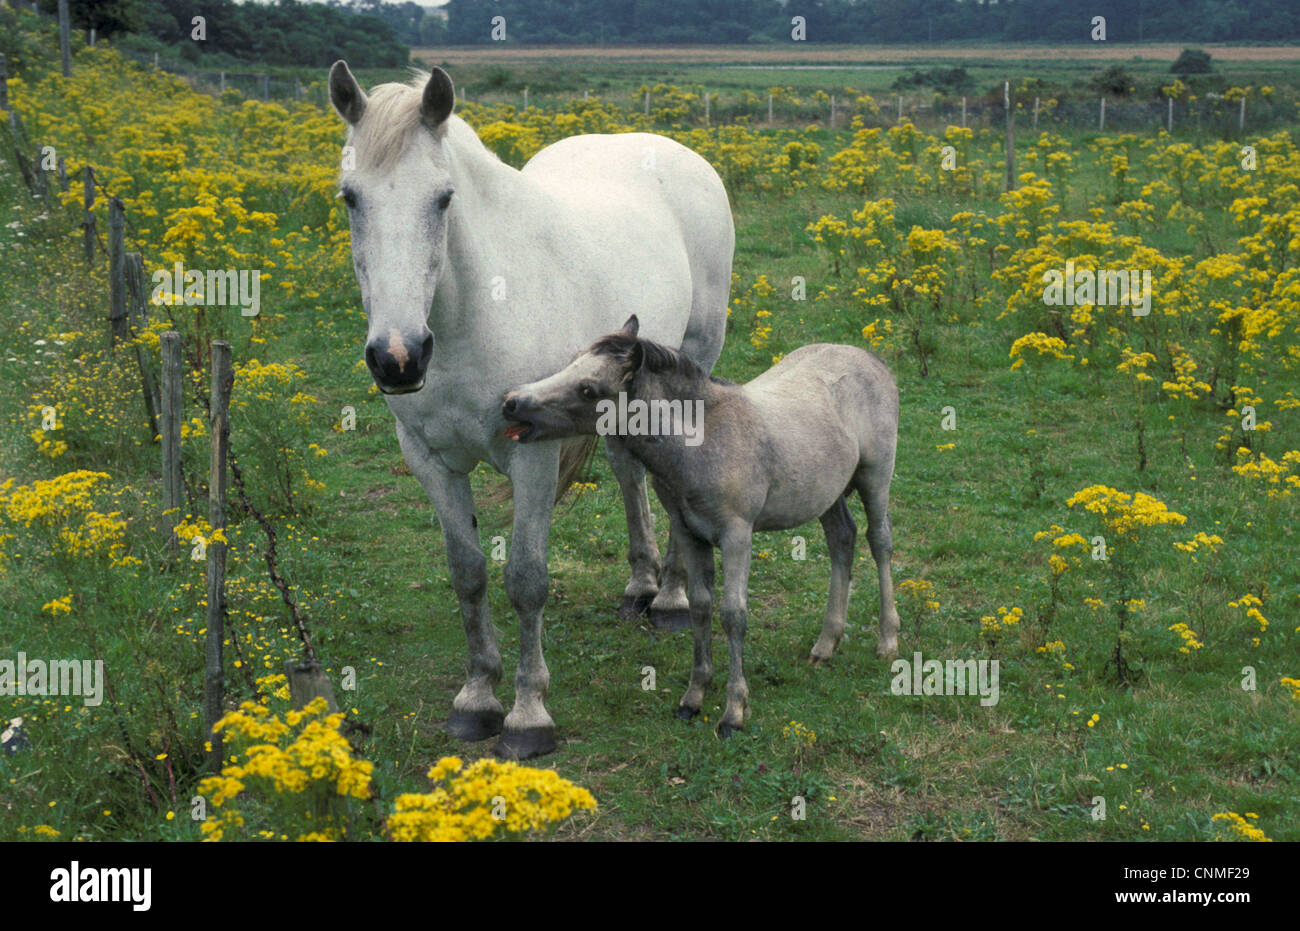 Horse, mare and foal, standing in field with Ragwort (Senecio sp.) very poisoness for horses, England Stock Photo